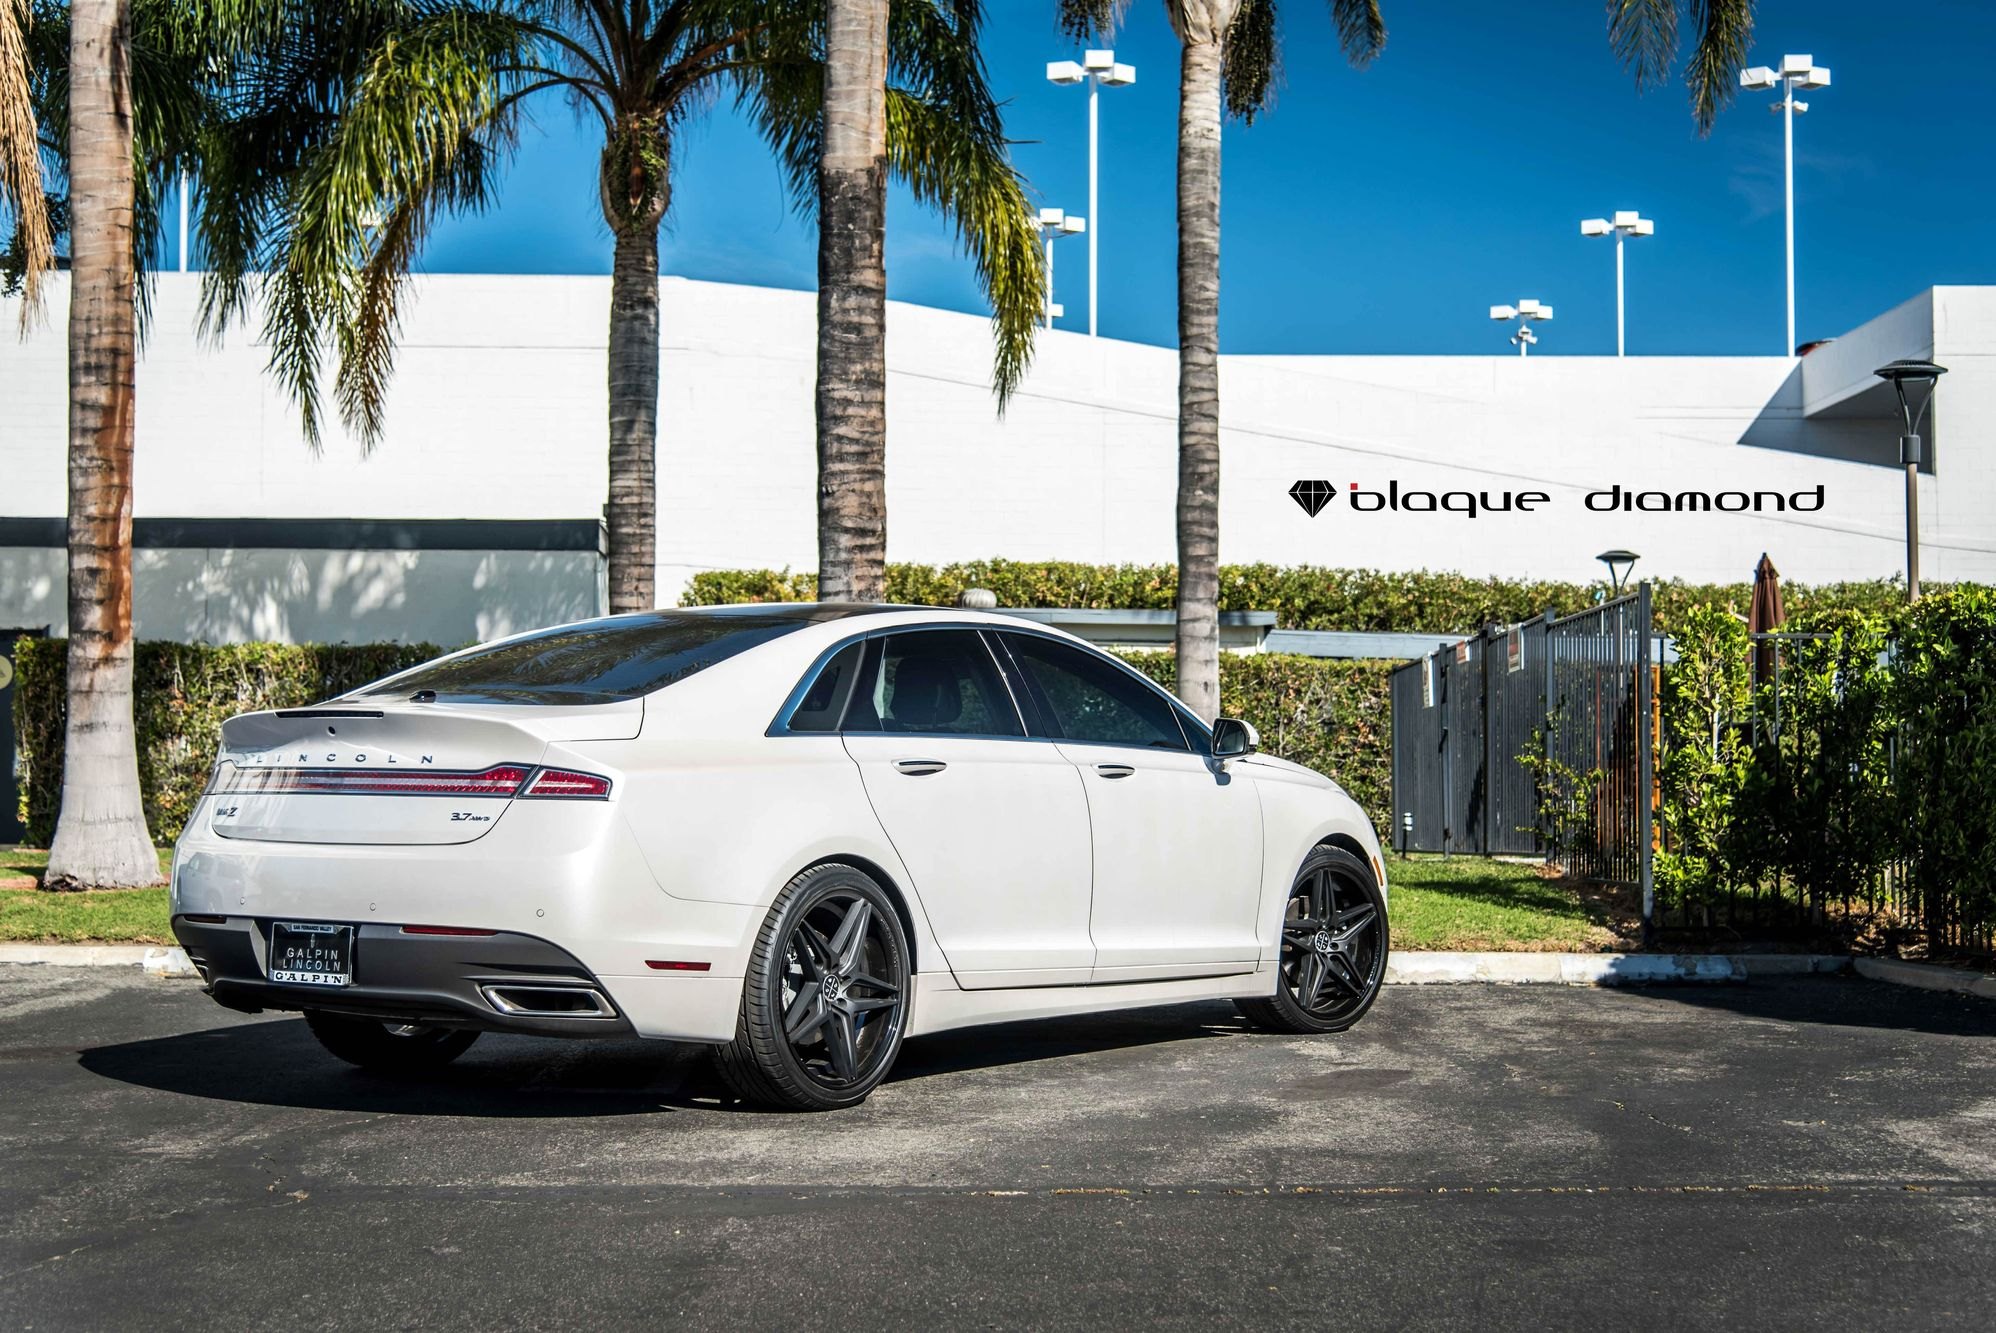 Aftermarket Rear Diffuser on White Lincoln MKZ - Photo by Blaque Diamond